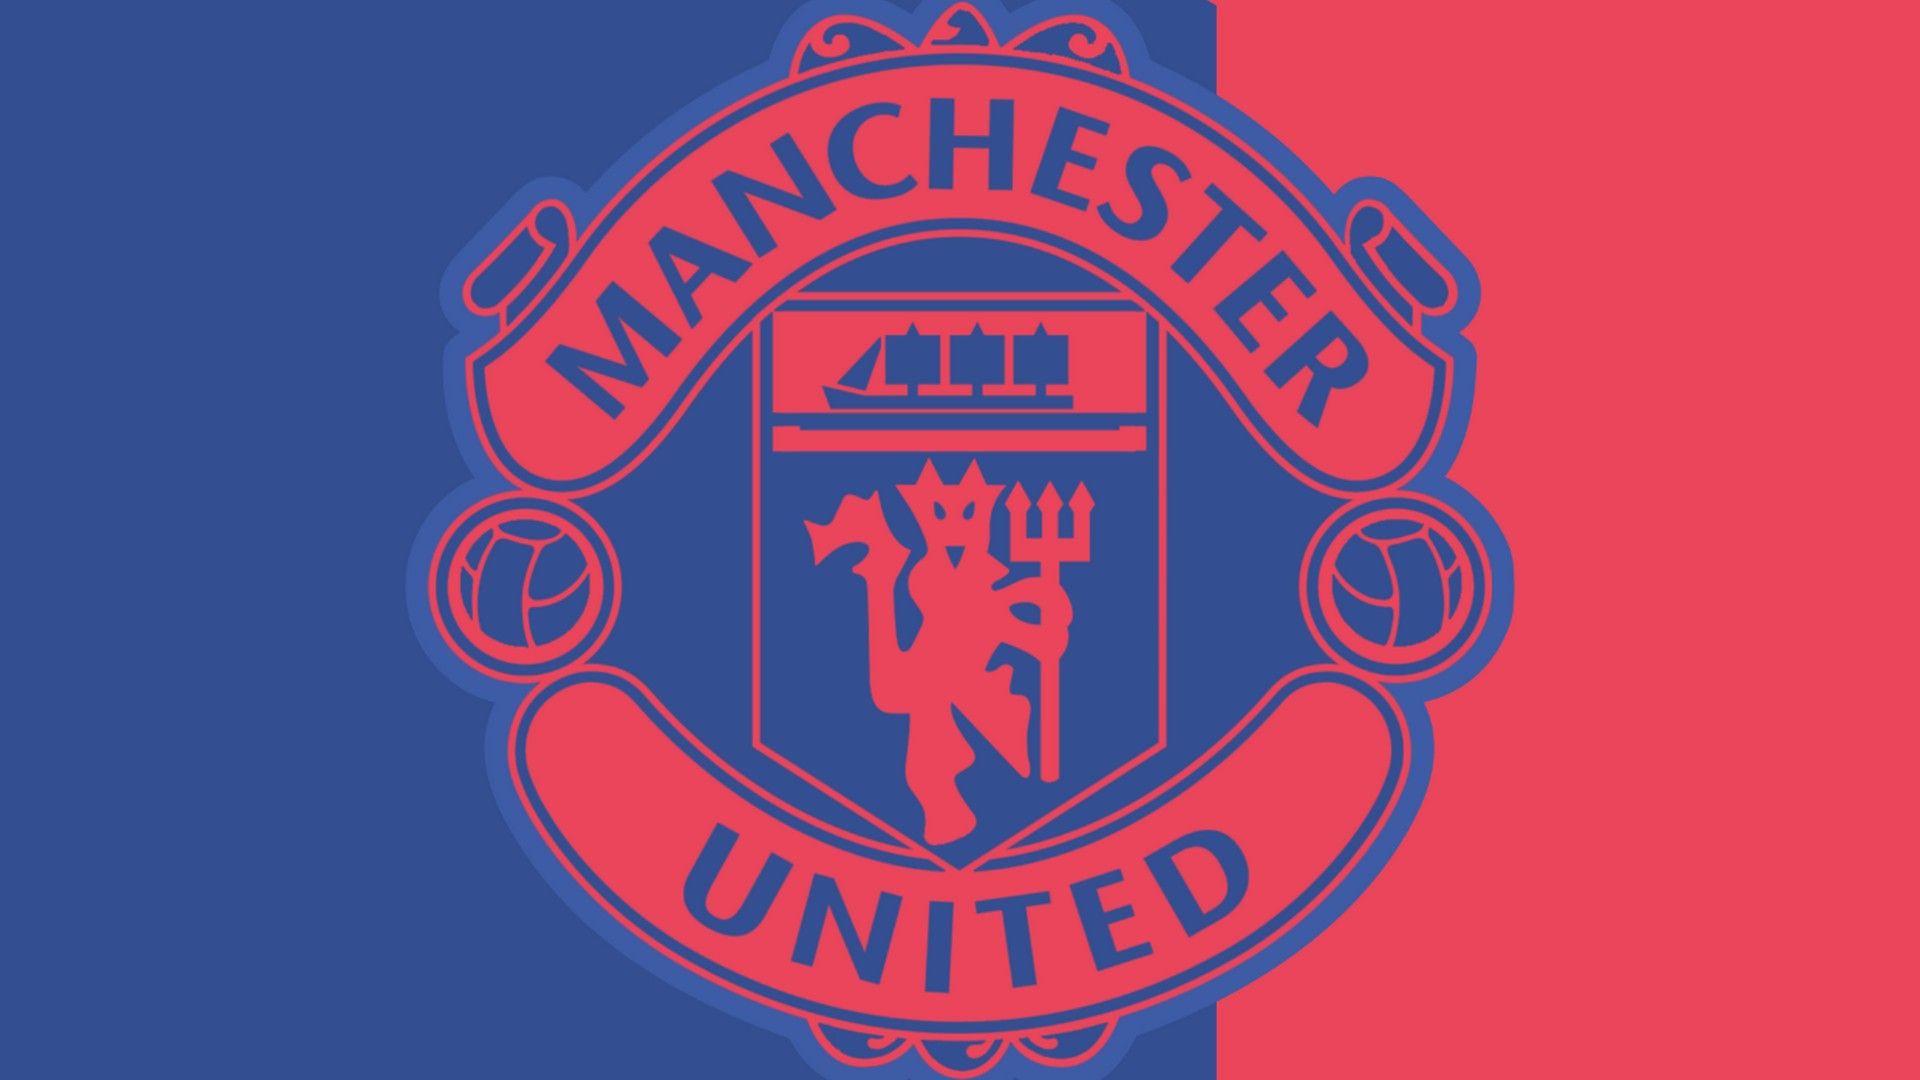 Manchester United Logo Wallpaper 2021 / Manchester United Hd Wallpapers